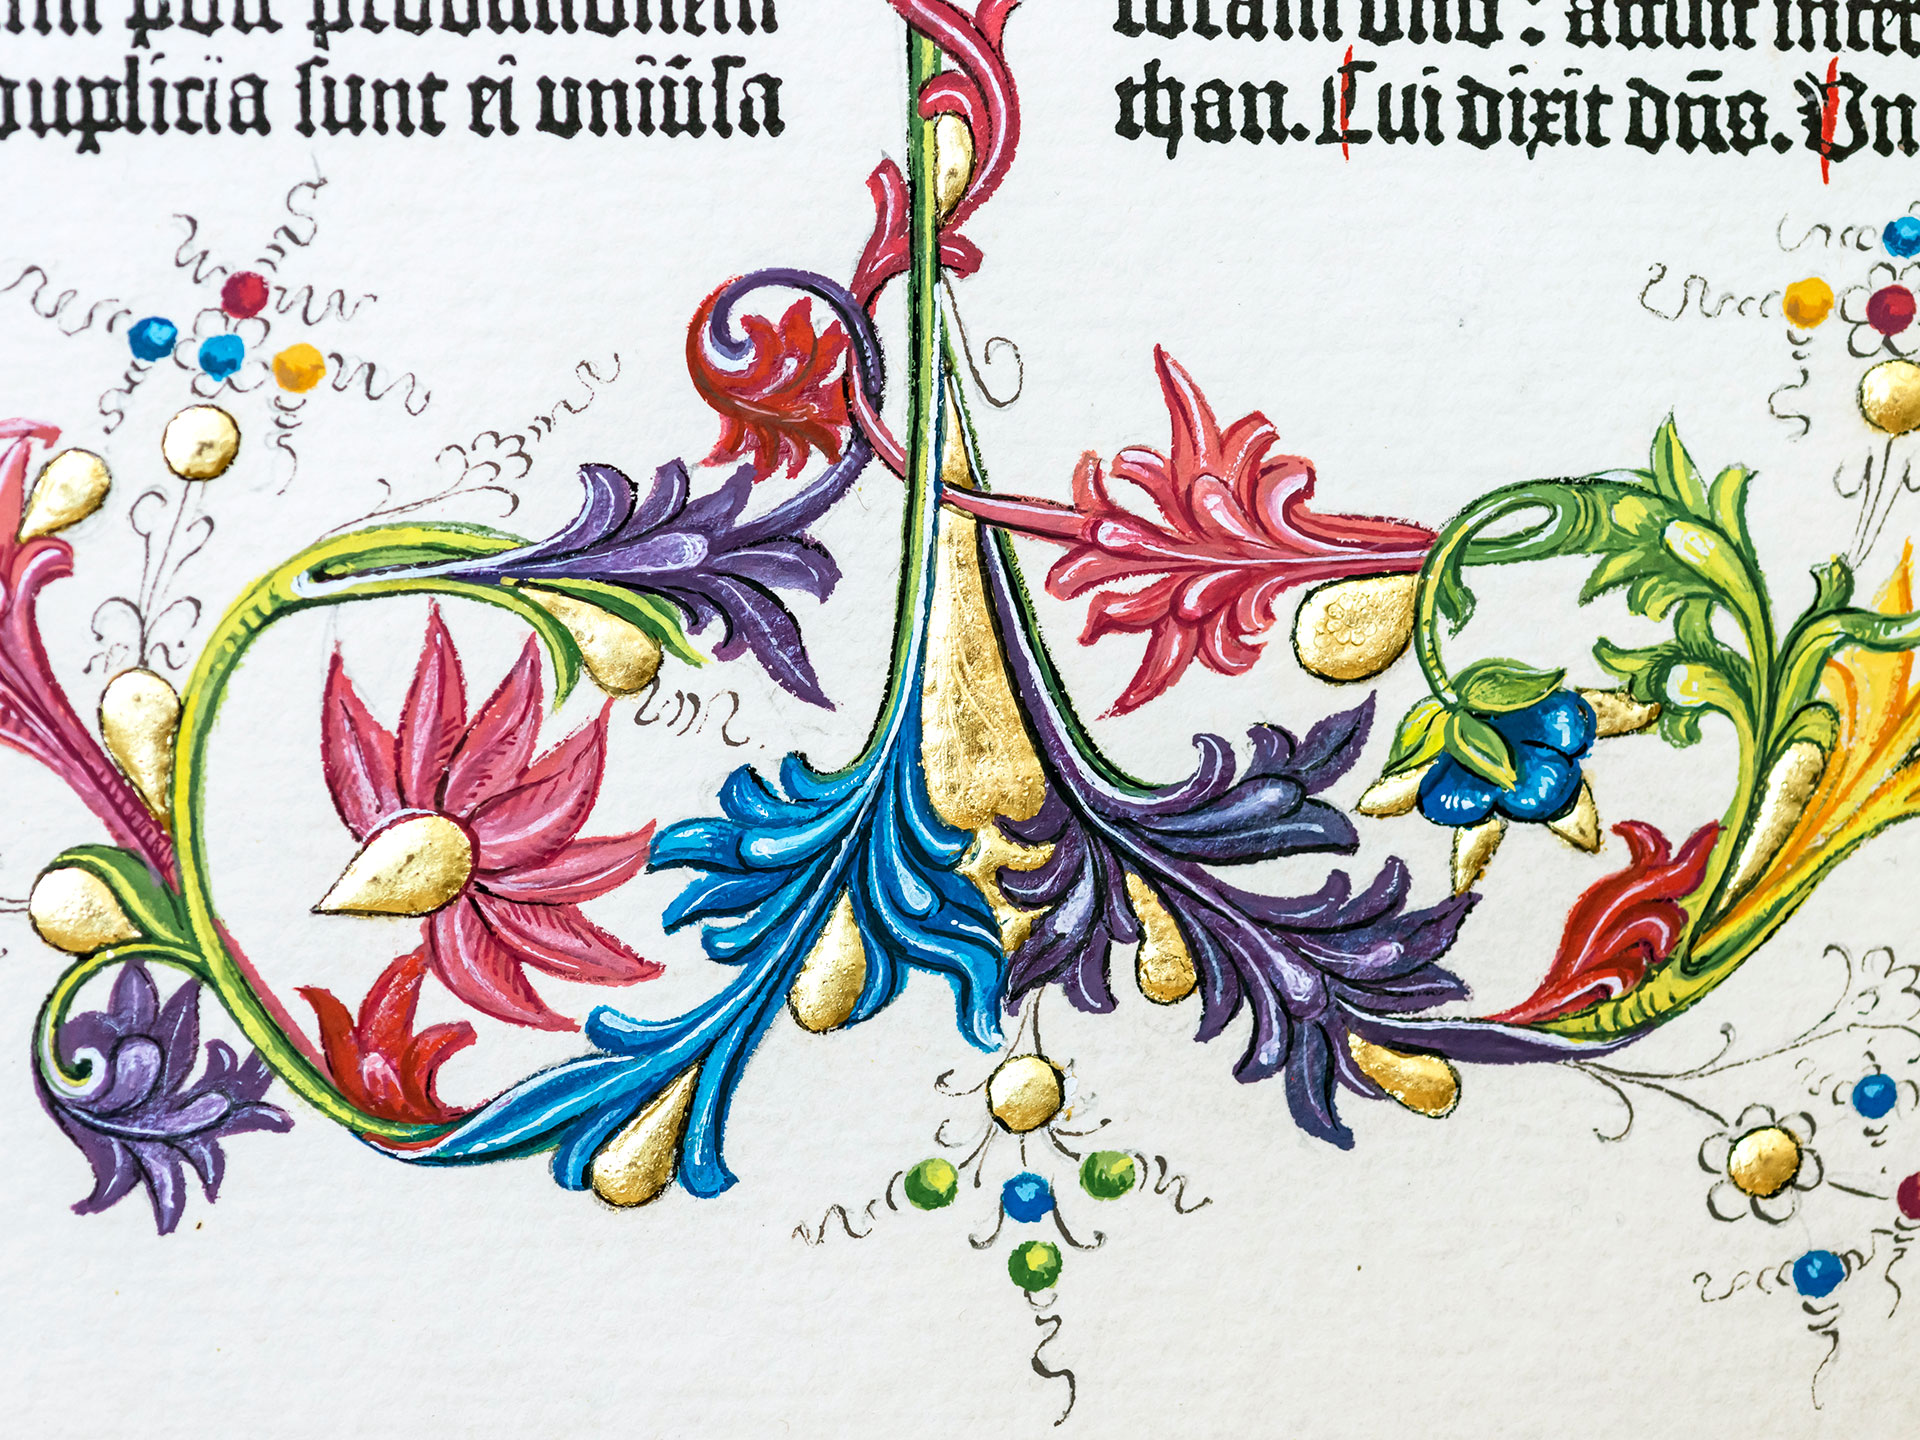 The Book of Job. Ornamental page from the Berlin copy of the Gutenberg Bible